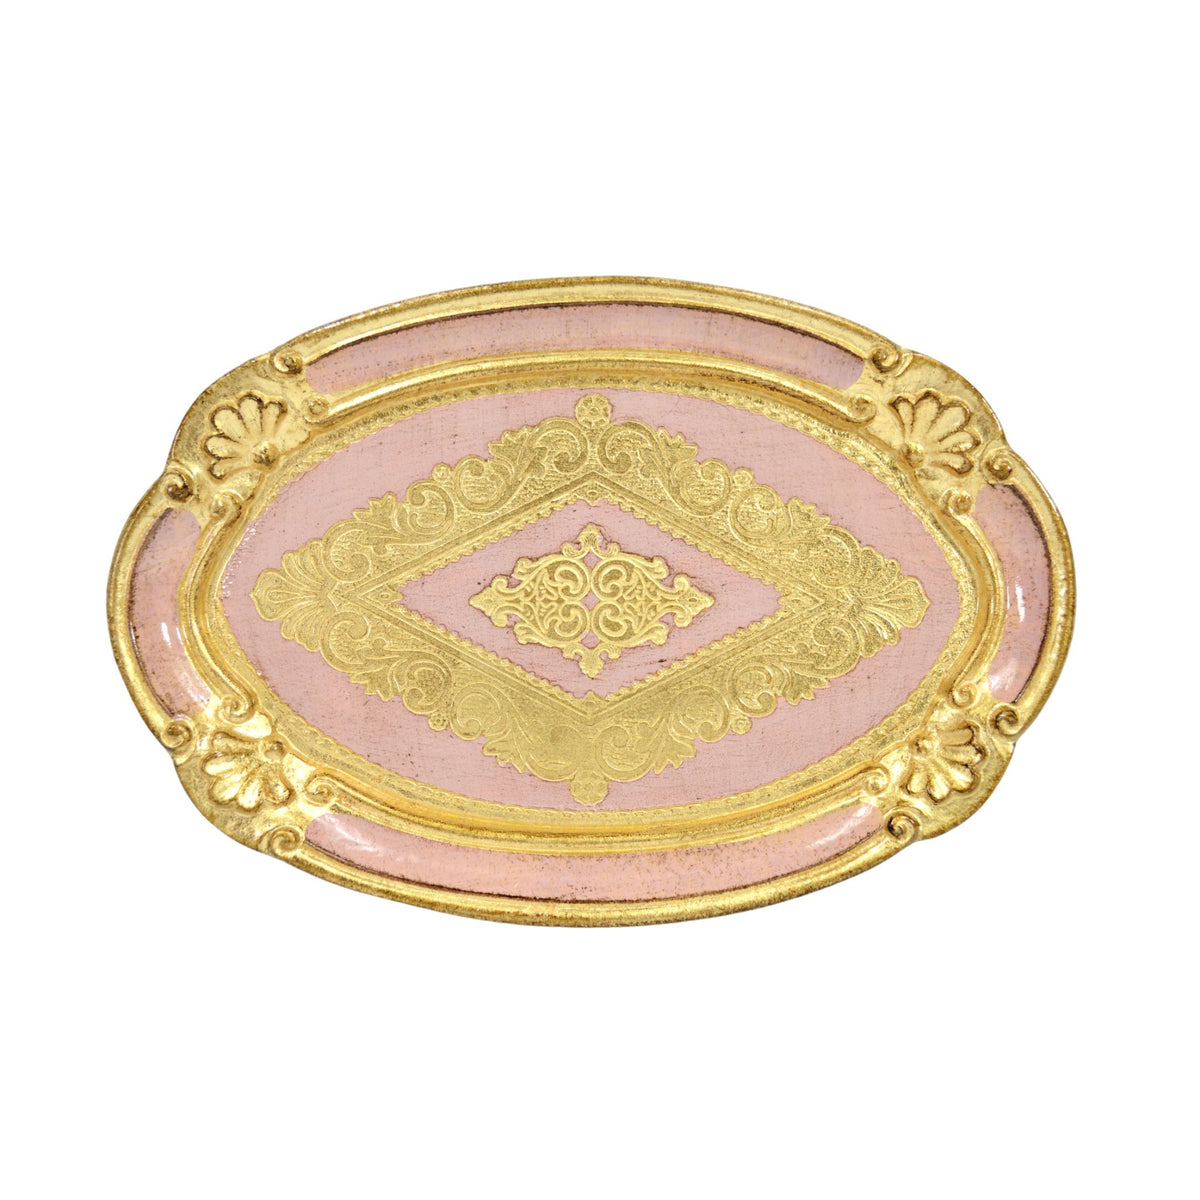 Florentine Carved Wood Oval Mini Tray, Made in Italy - My Italian Decor